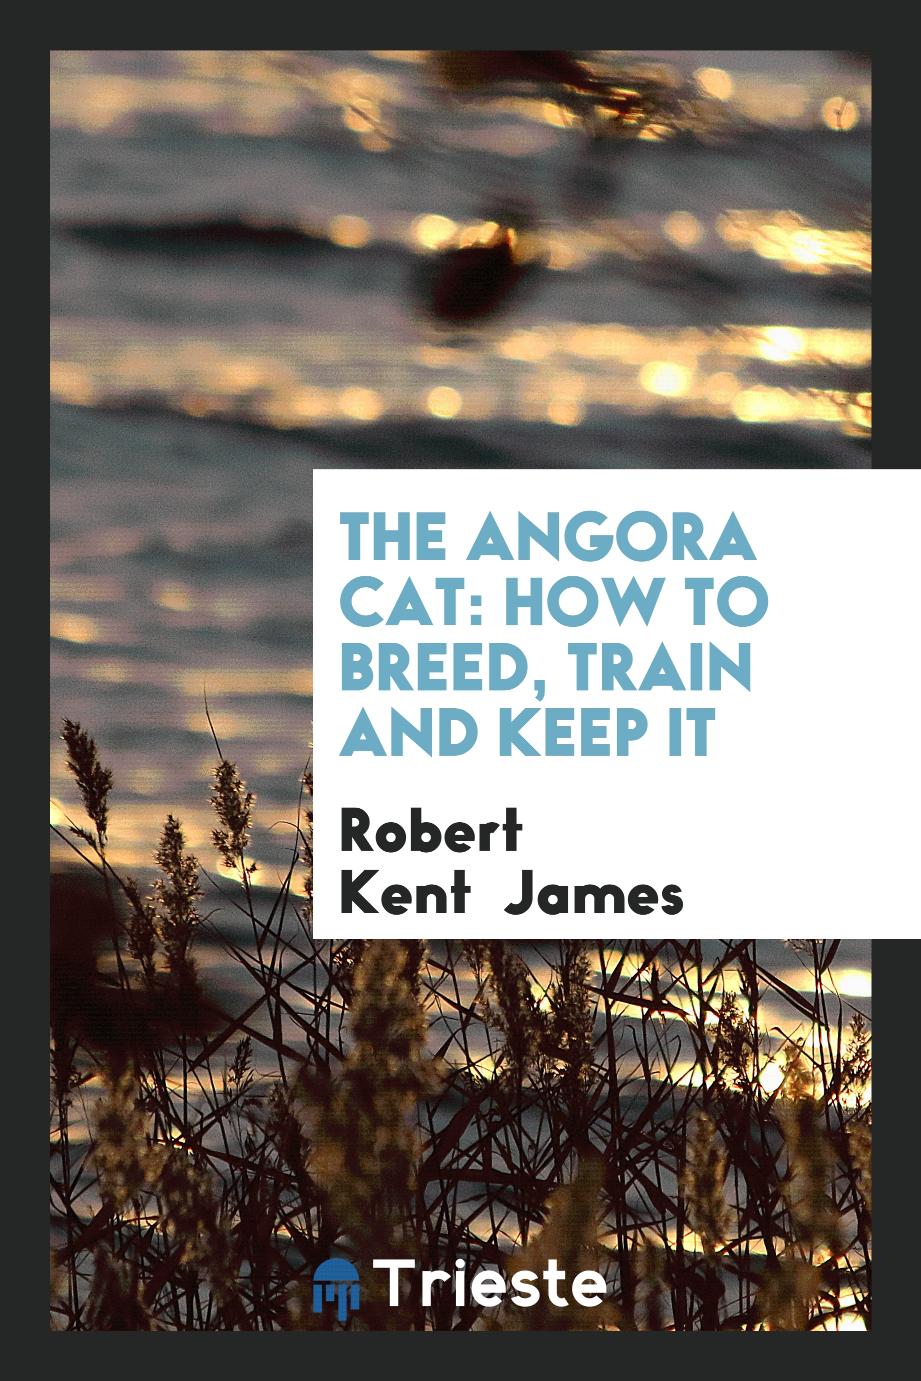 The Angora Cat: How to Breed, Train and Keep It